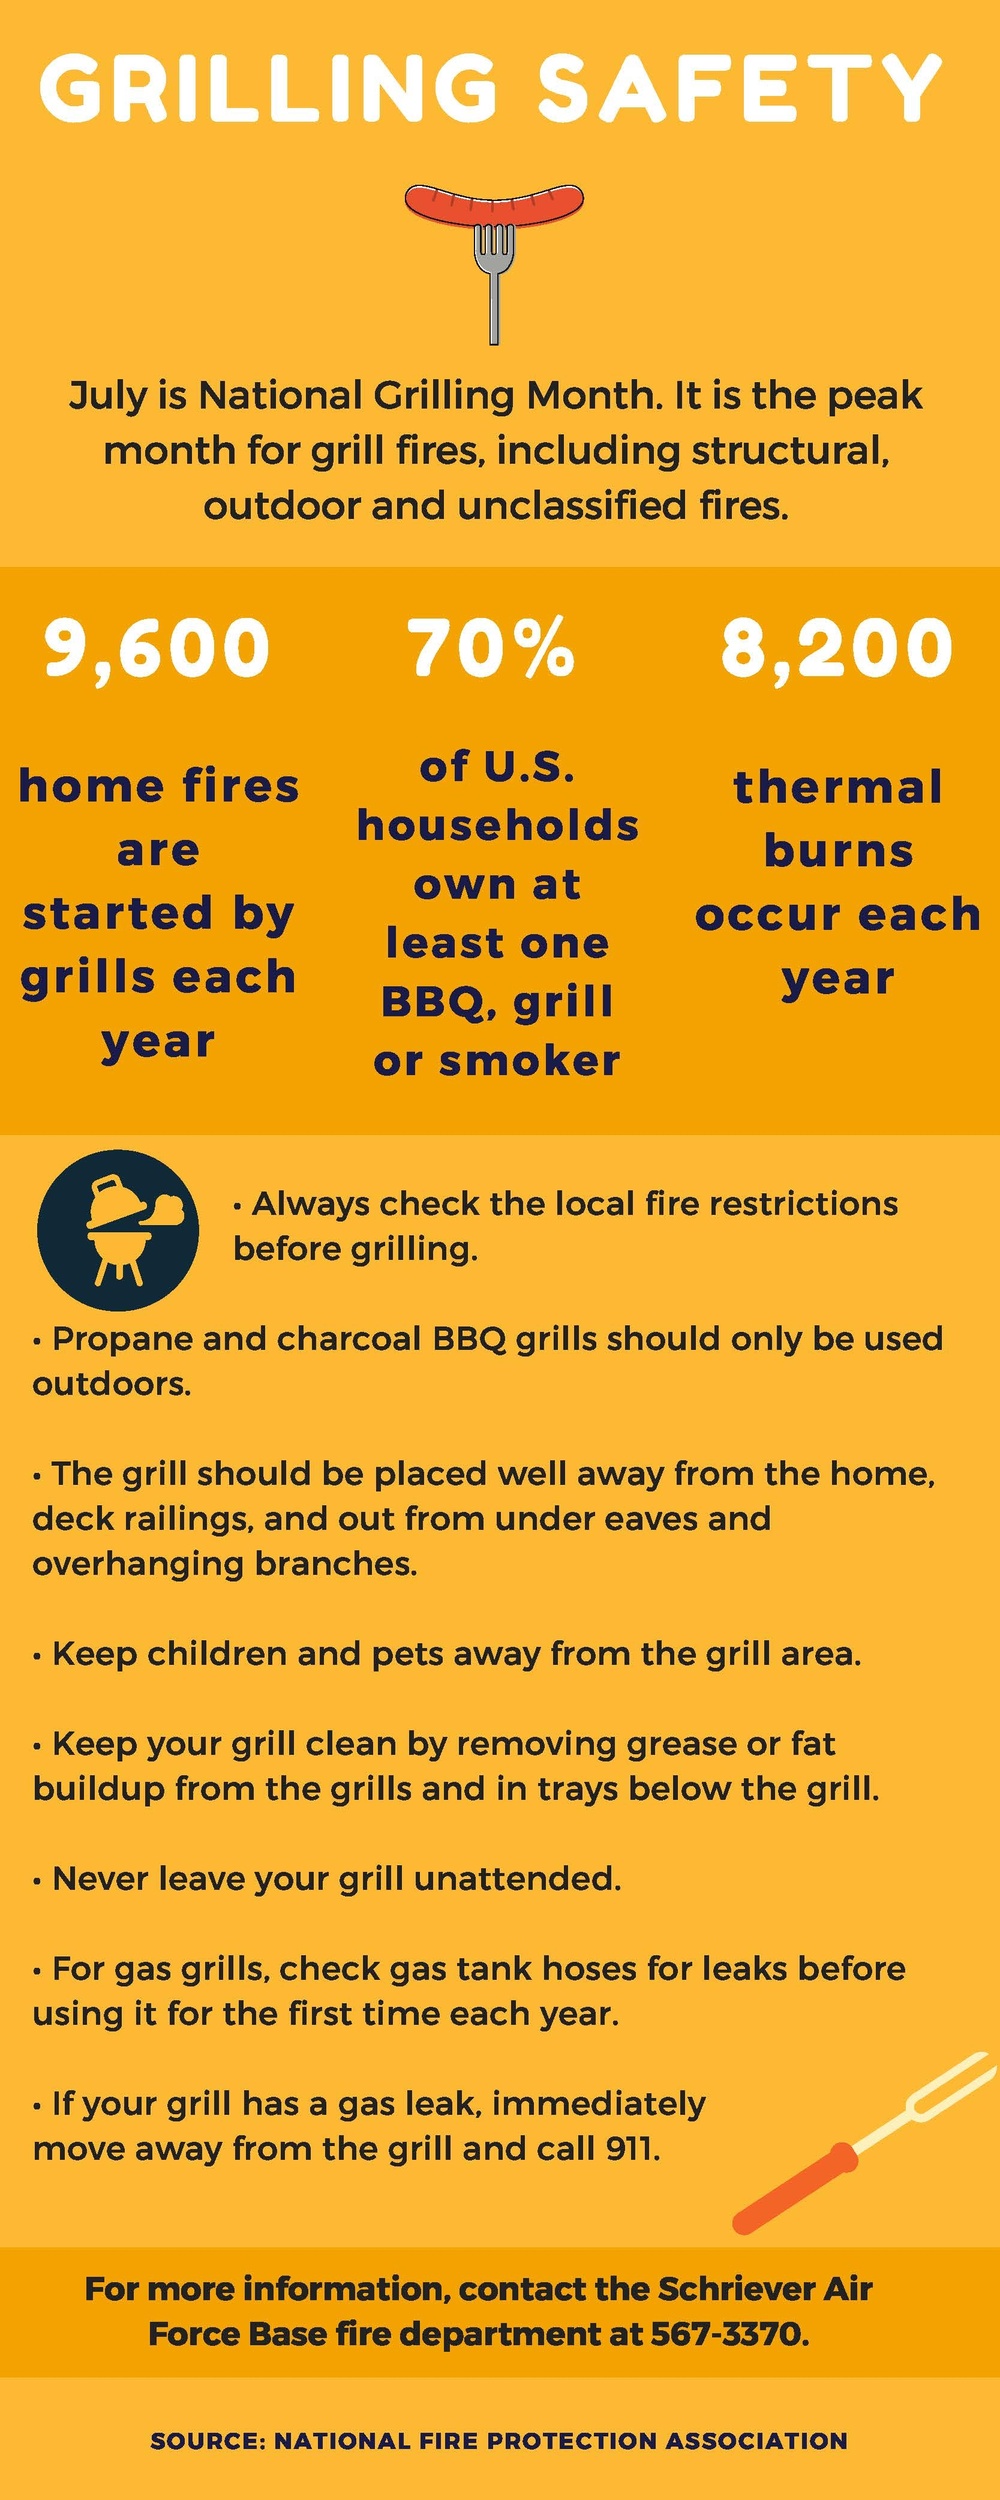 Remember grilling safety